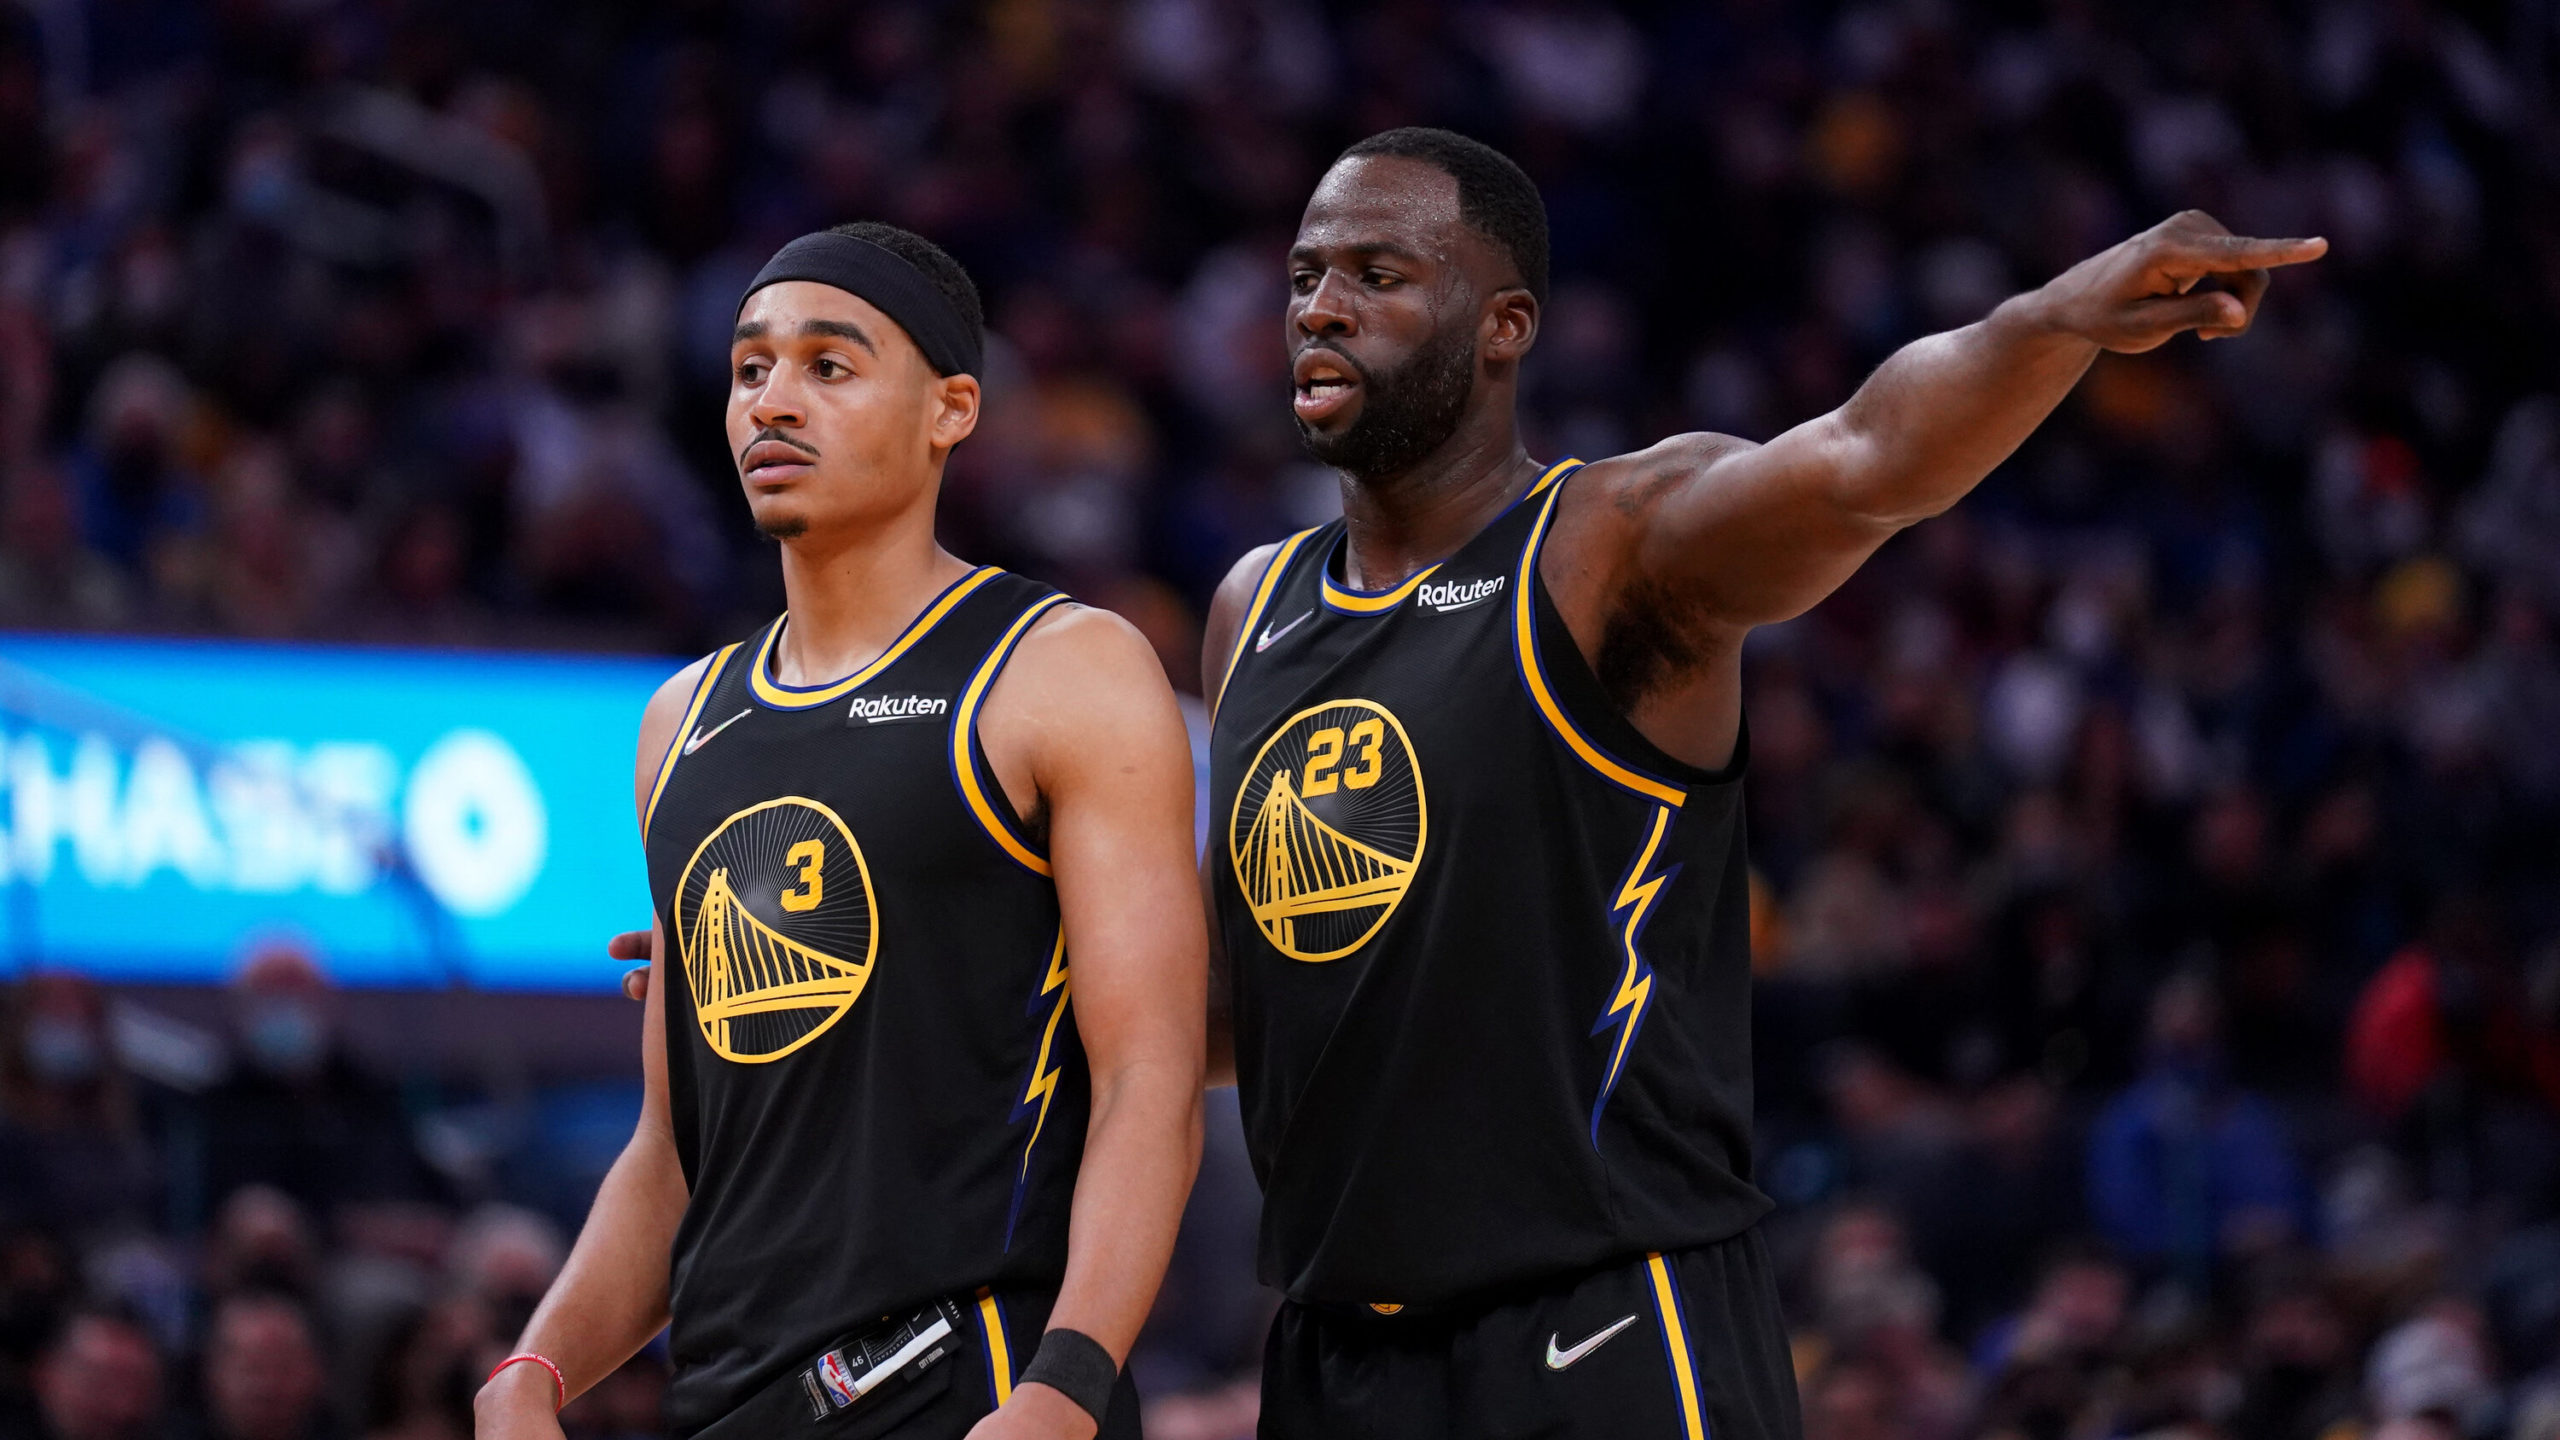 Draymond Green On His Relationship Status With Jordan Poole After He Knocked Poole Out at Practice